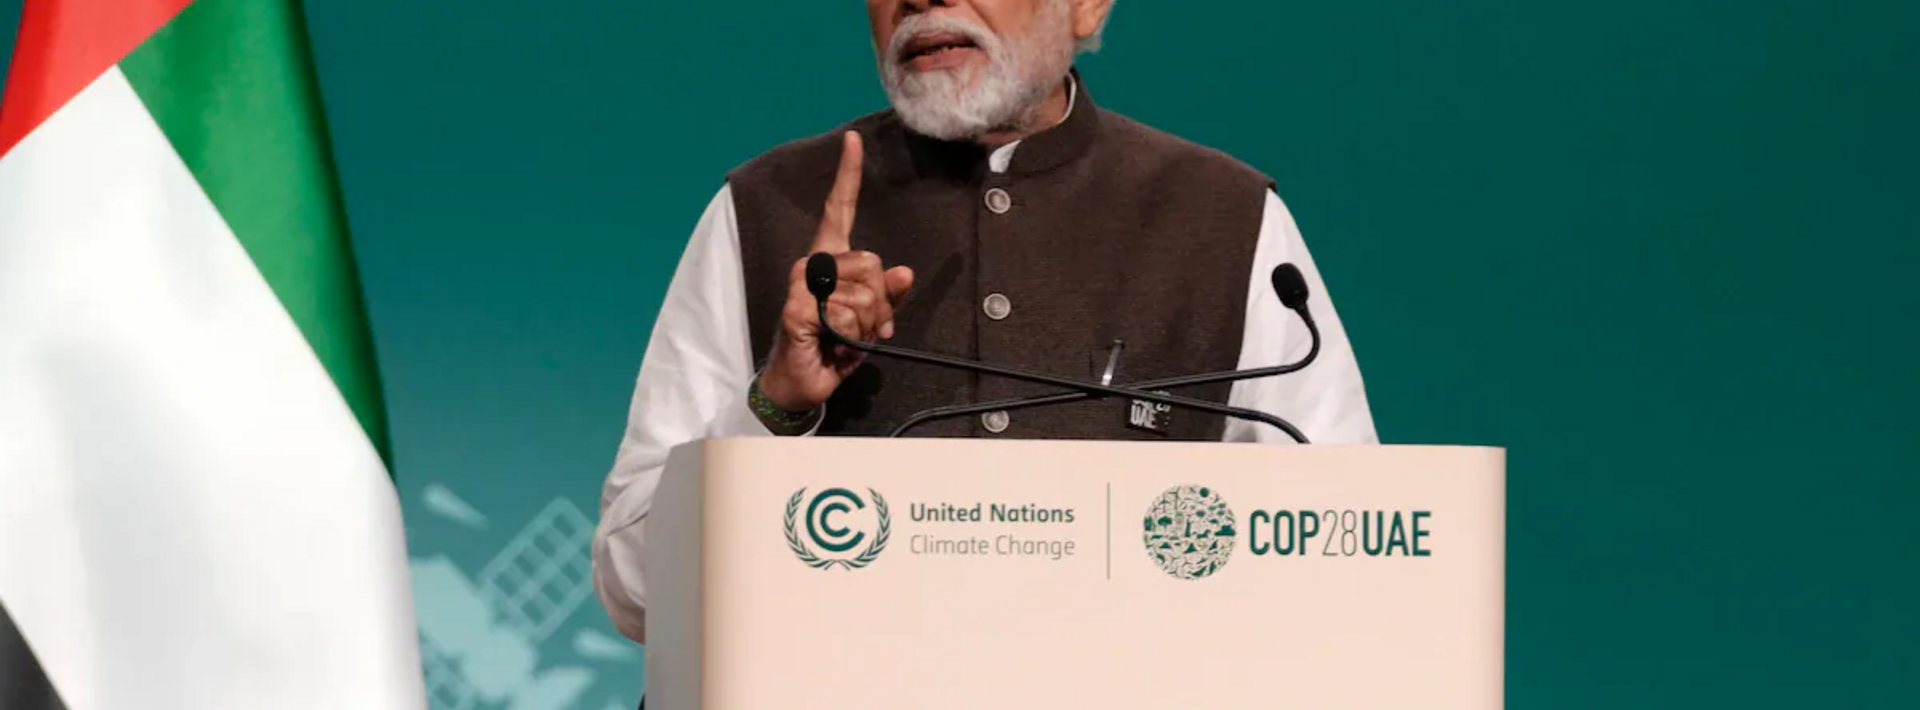 prime minister modi of india speaking at a cop28 pavilion with a green background behind him